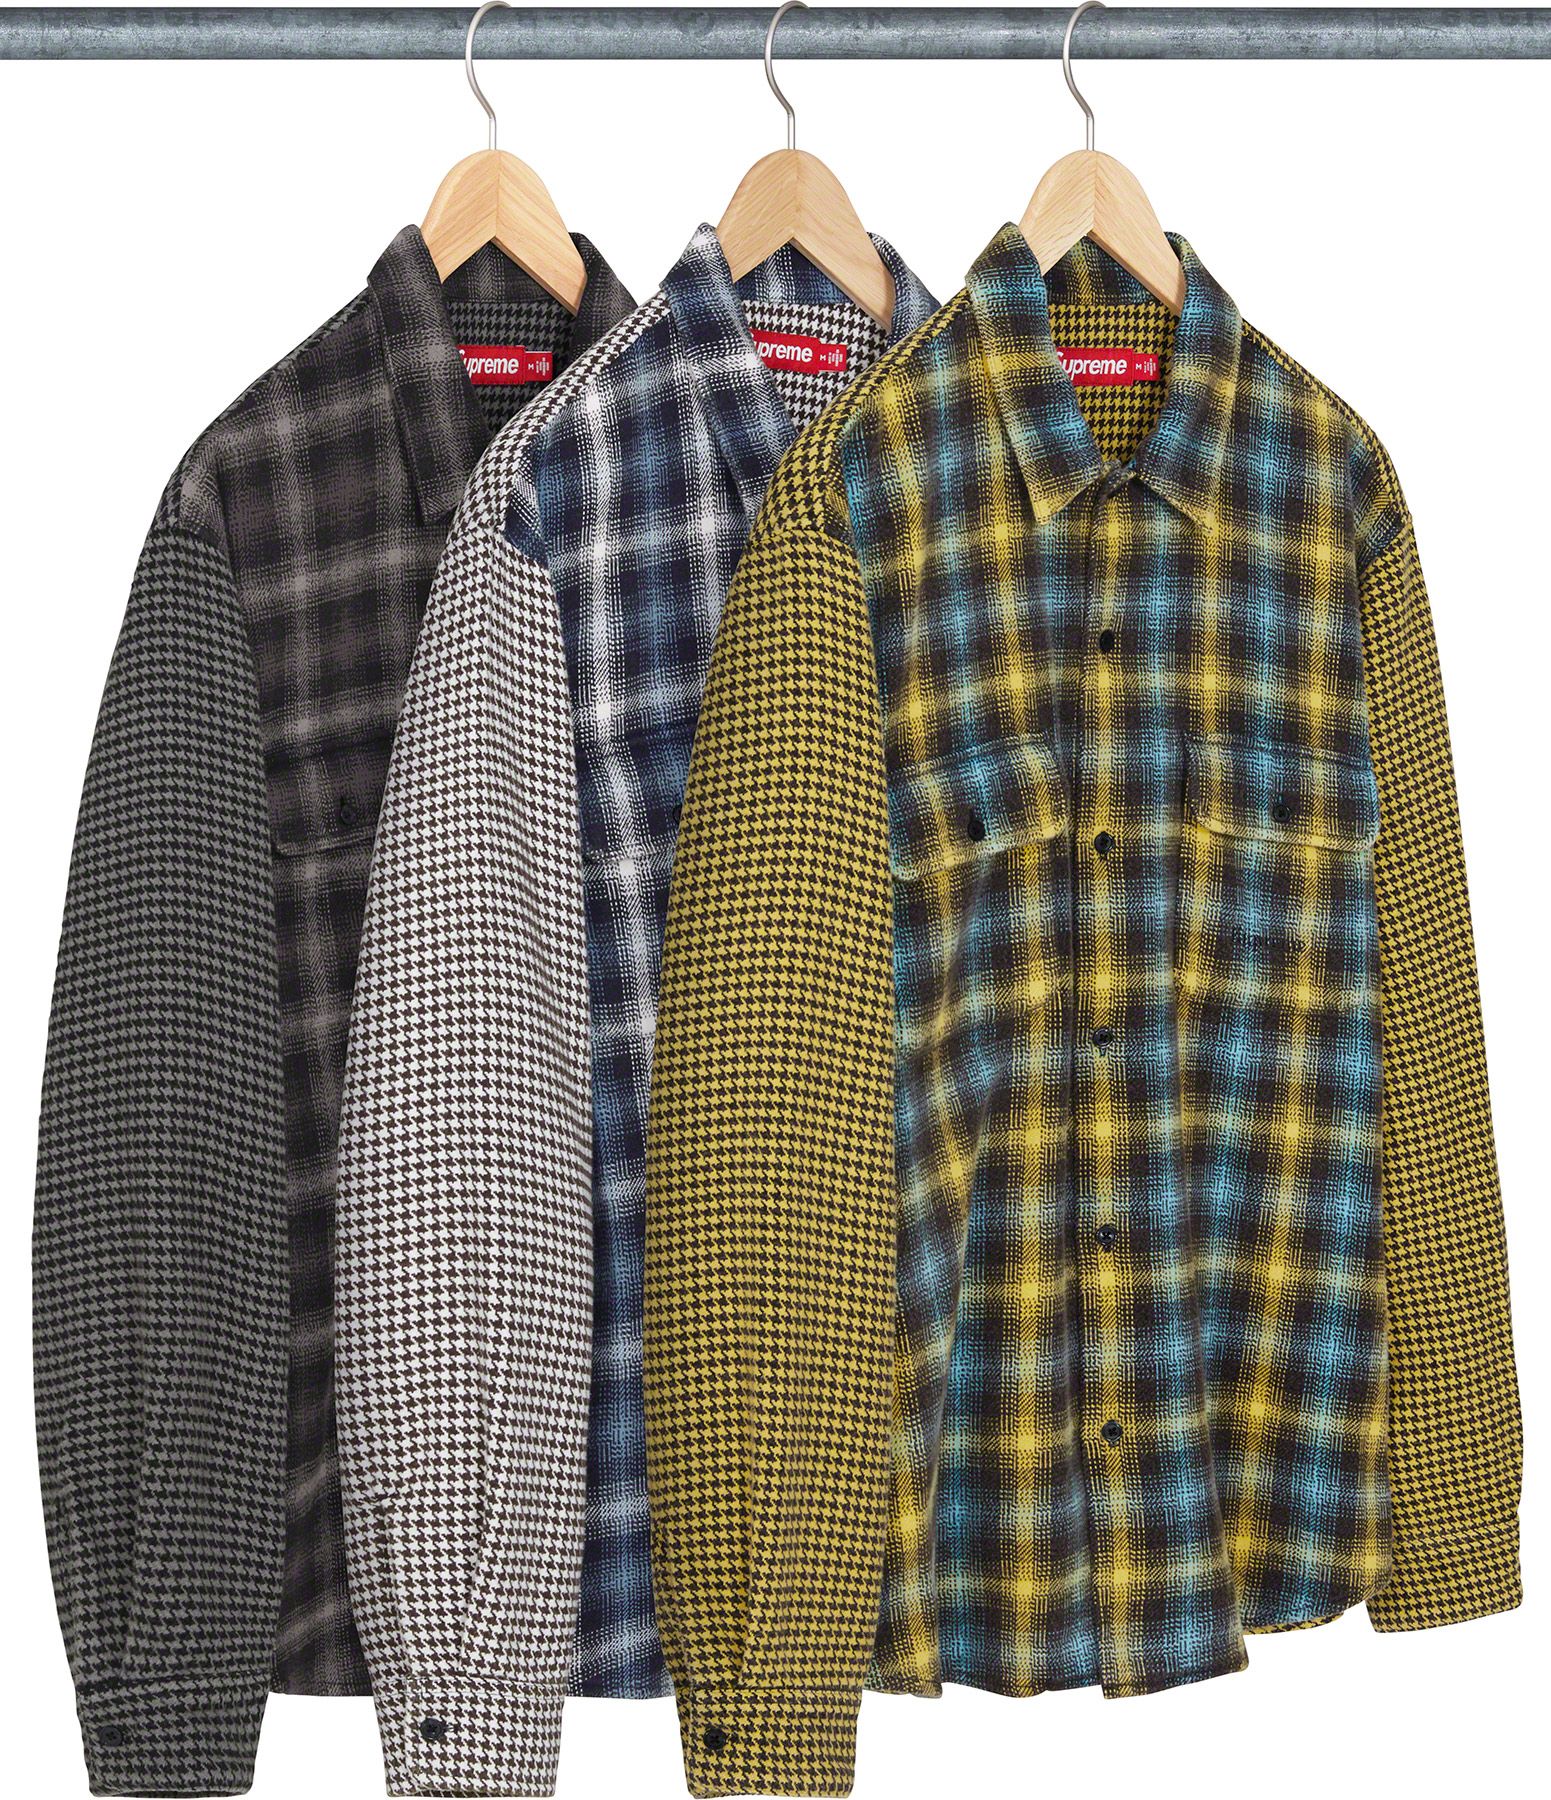 Loose Fit Stripe Shirt - Fall/Winter 2023 Preview – Supreme